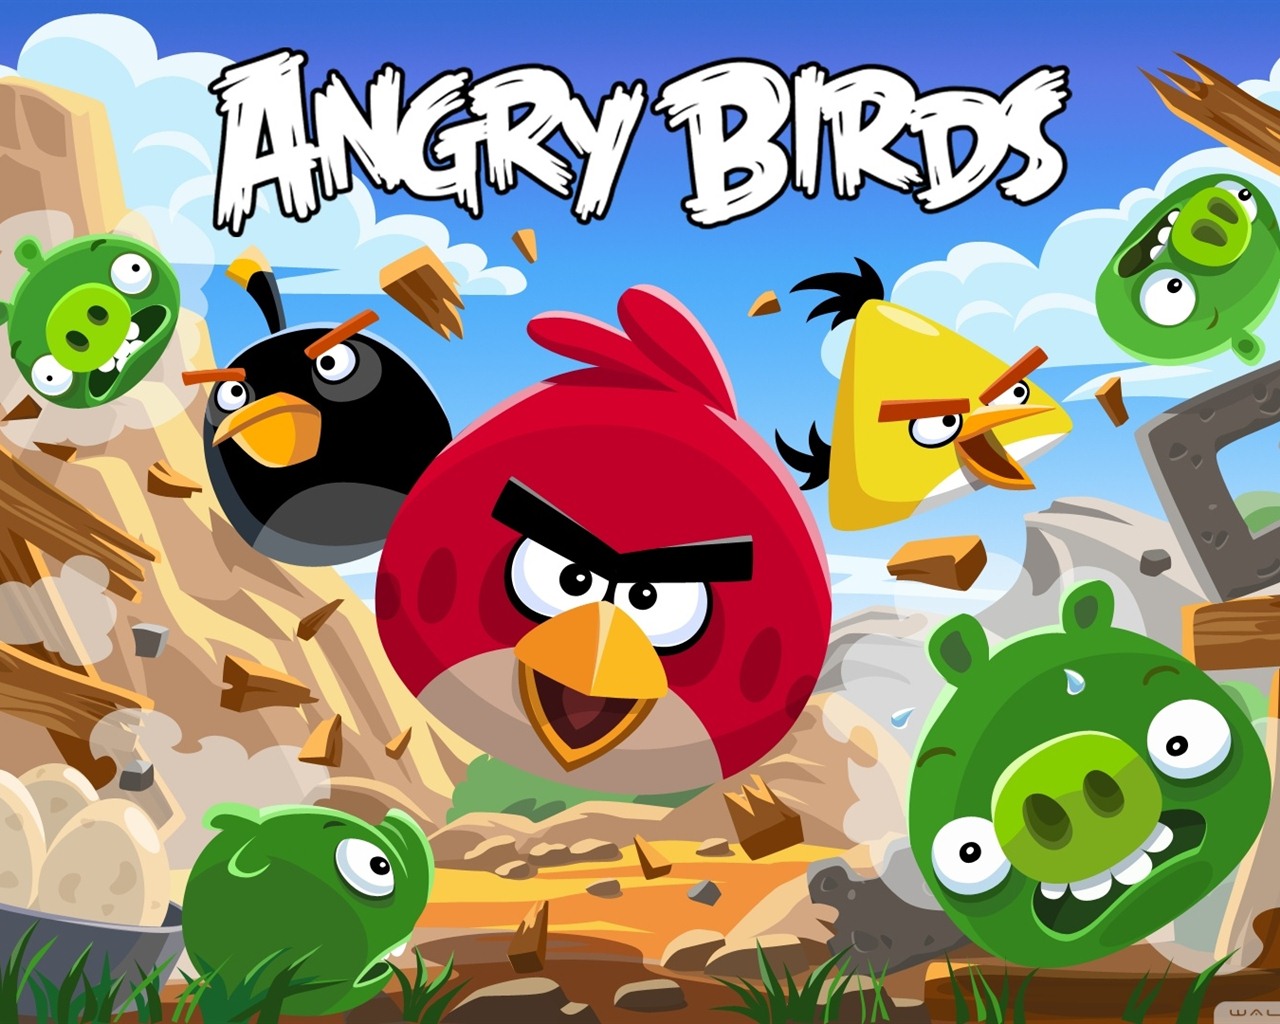 Angry Birds Spiel wallpapers #10 - 1280x1024